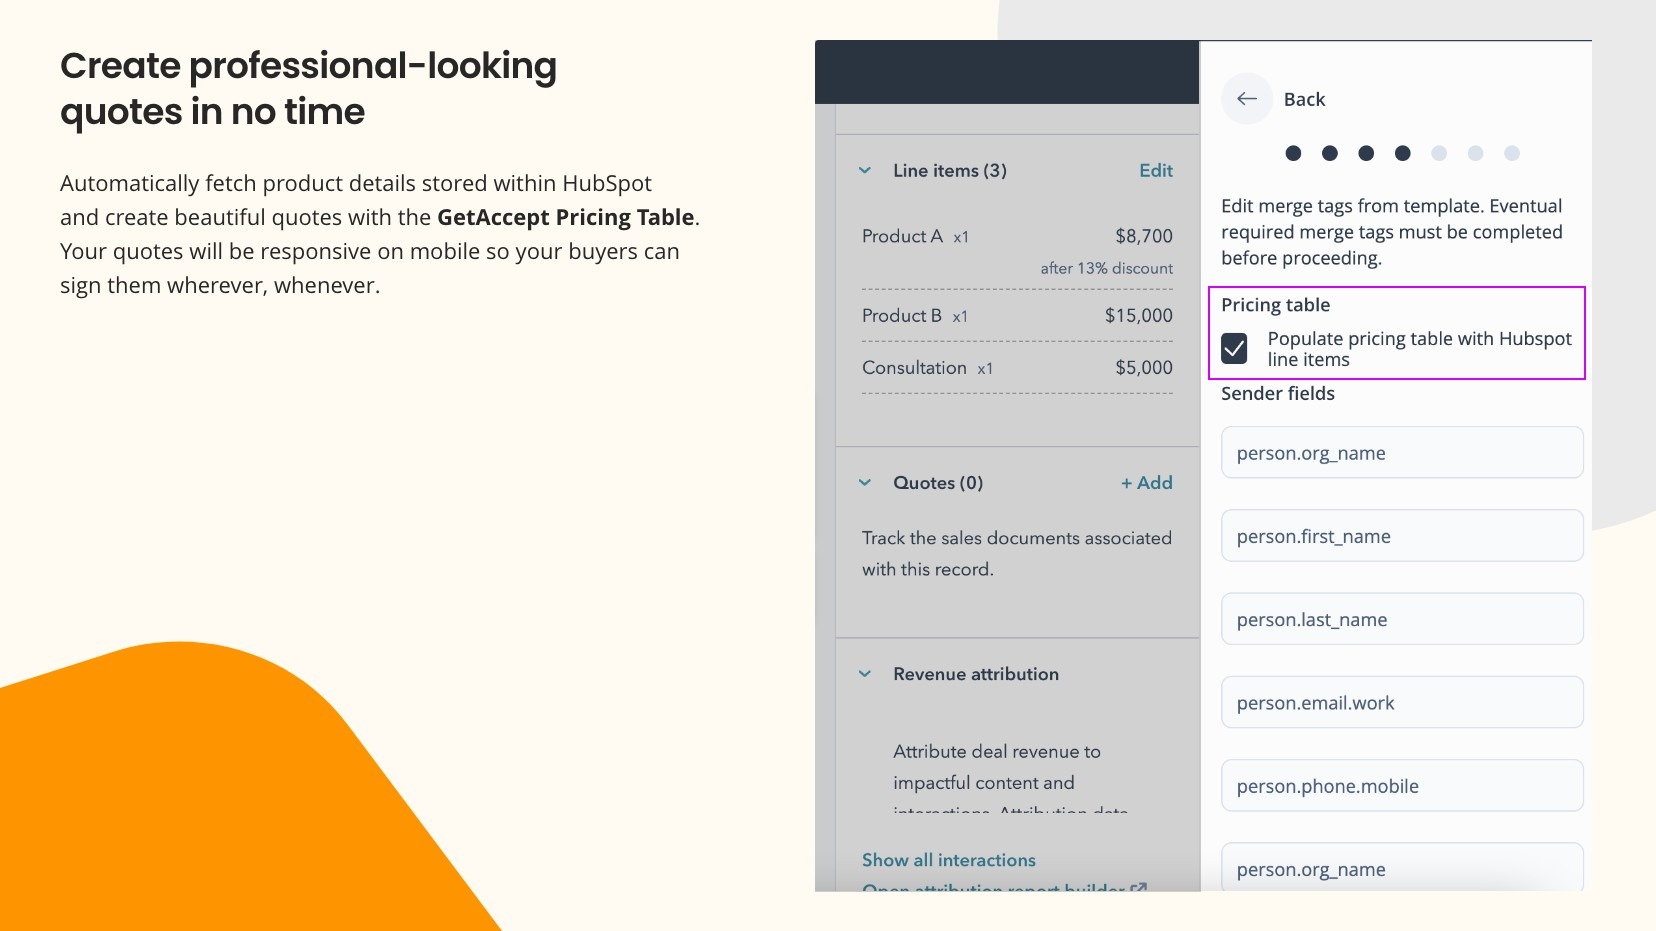 HubSpot + GetAccept: Pricing Table